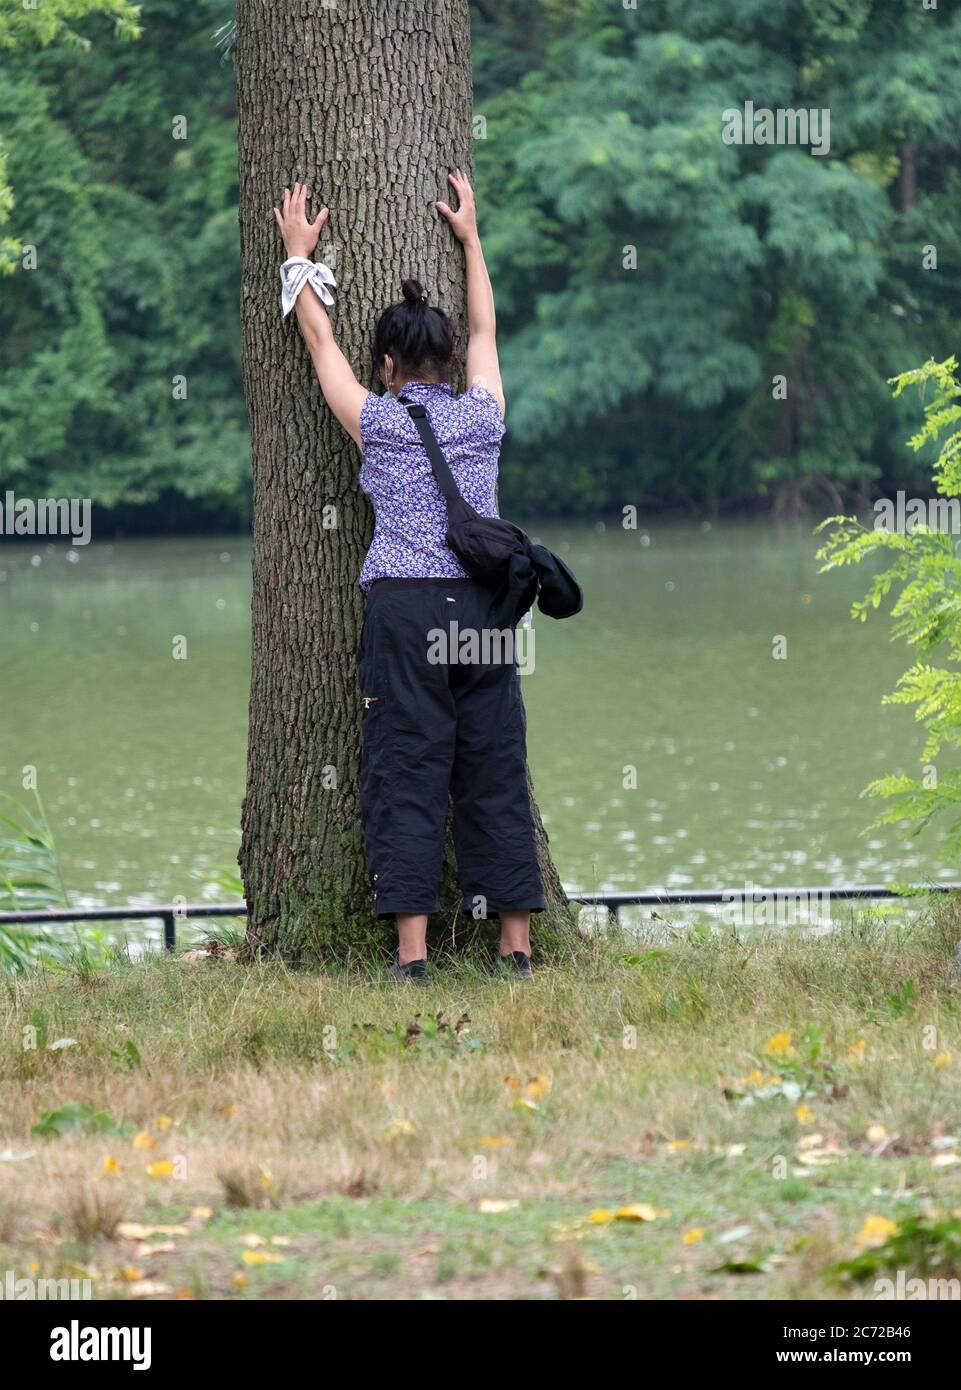 TREE HUGGING. An Asian American seems to be embracing a tree near the lake in Kissena Park, Flushing, New York City. Stock Photo